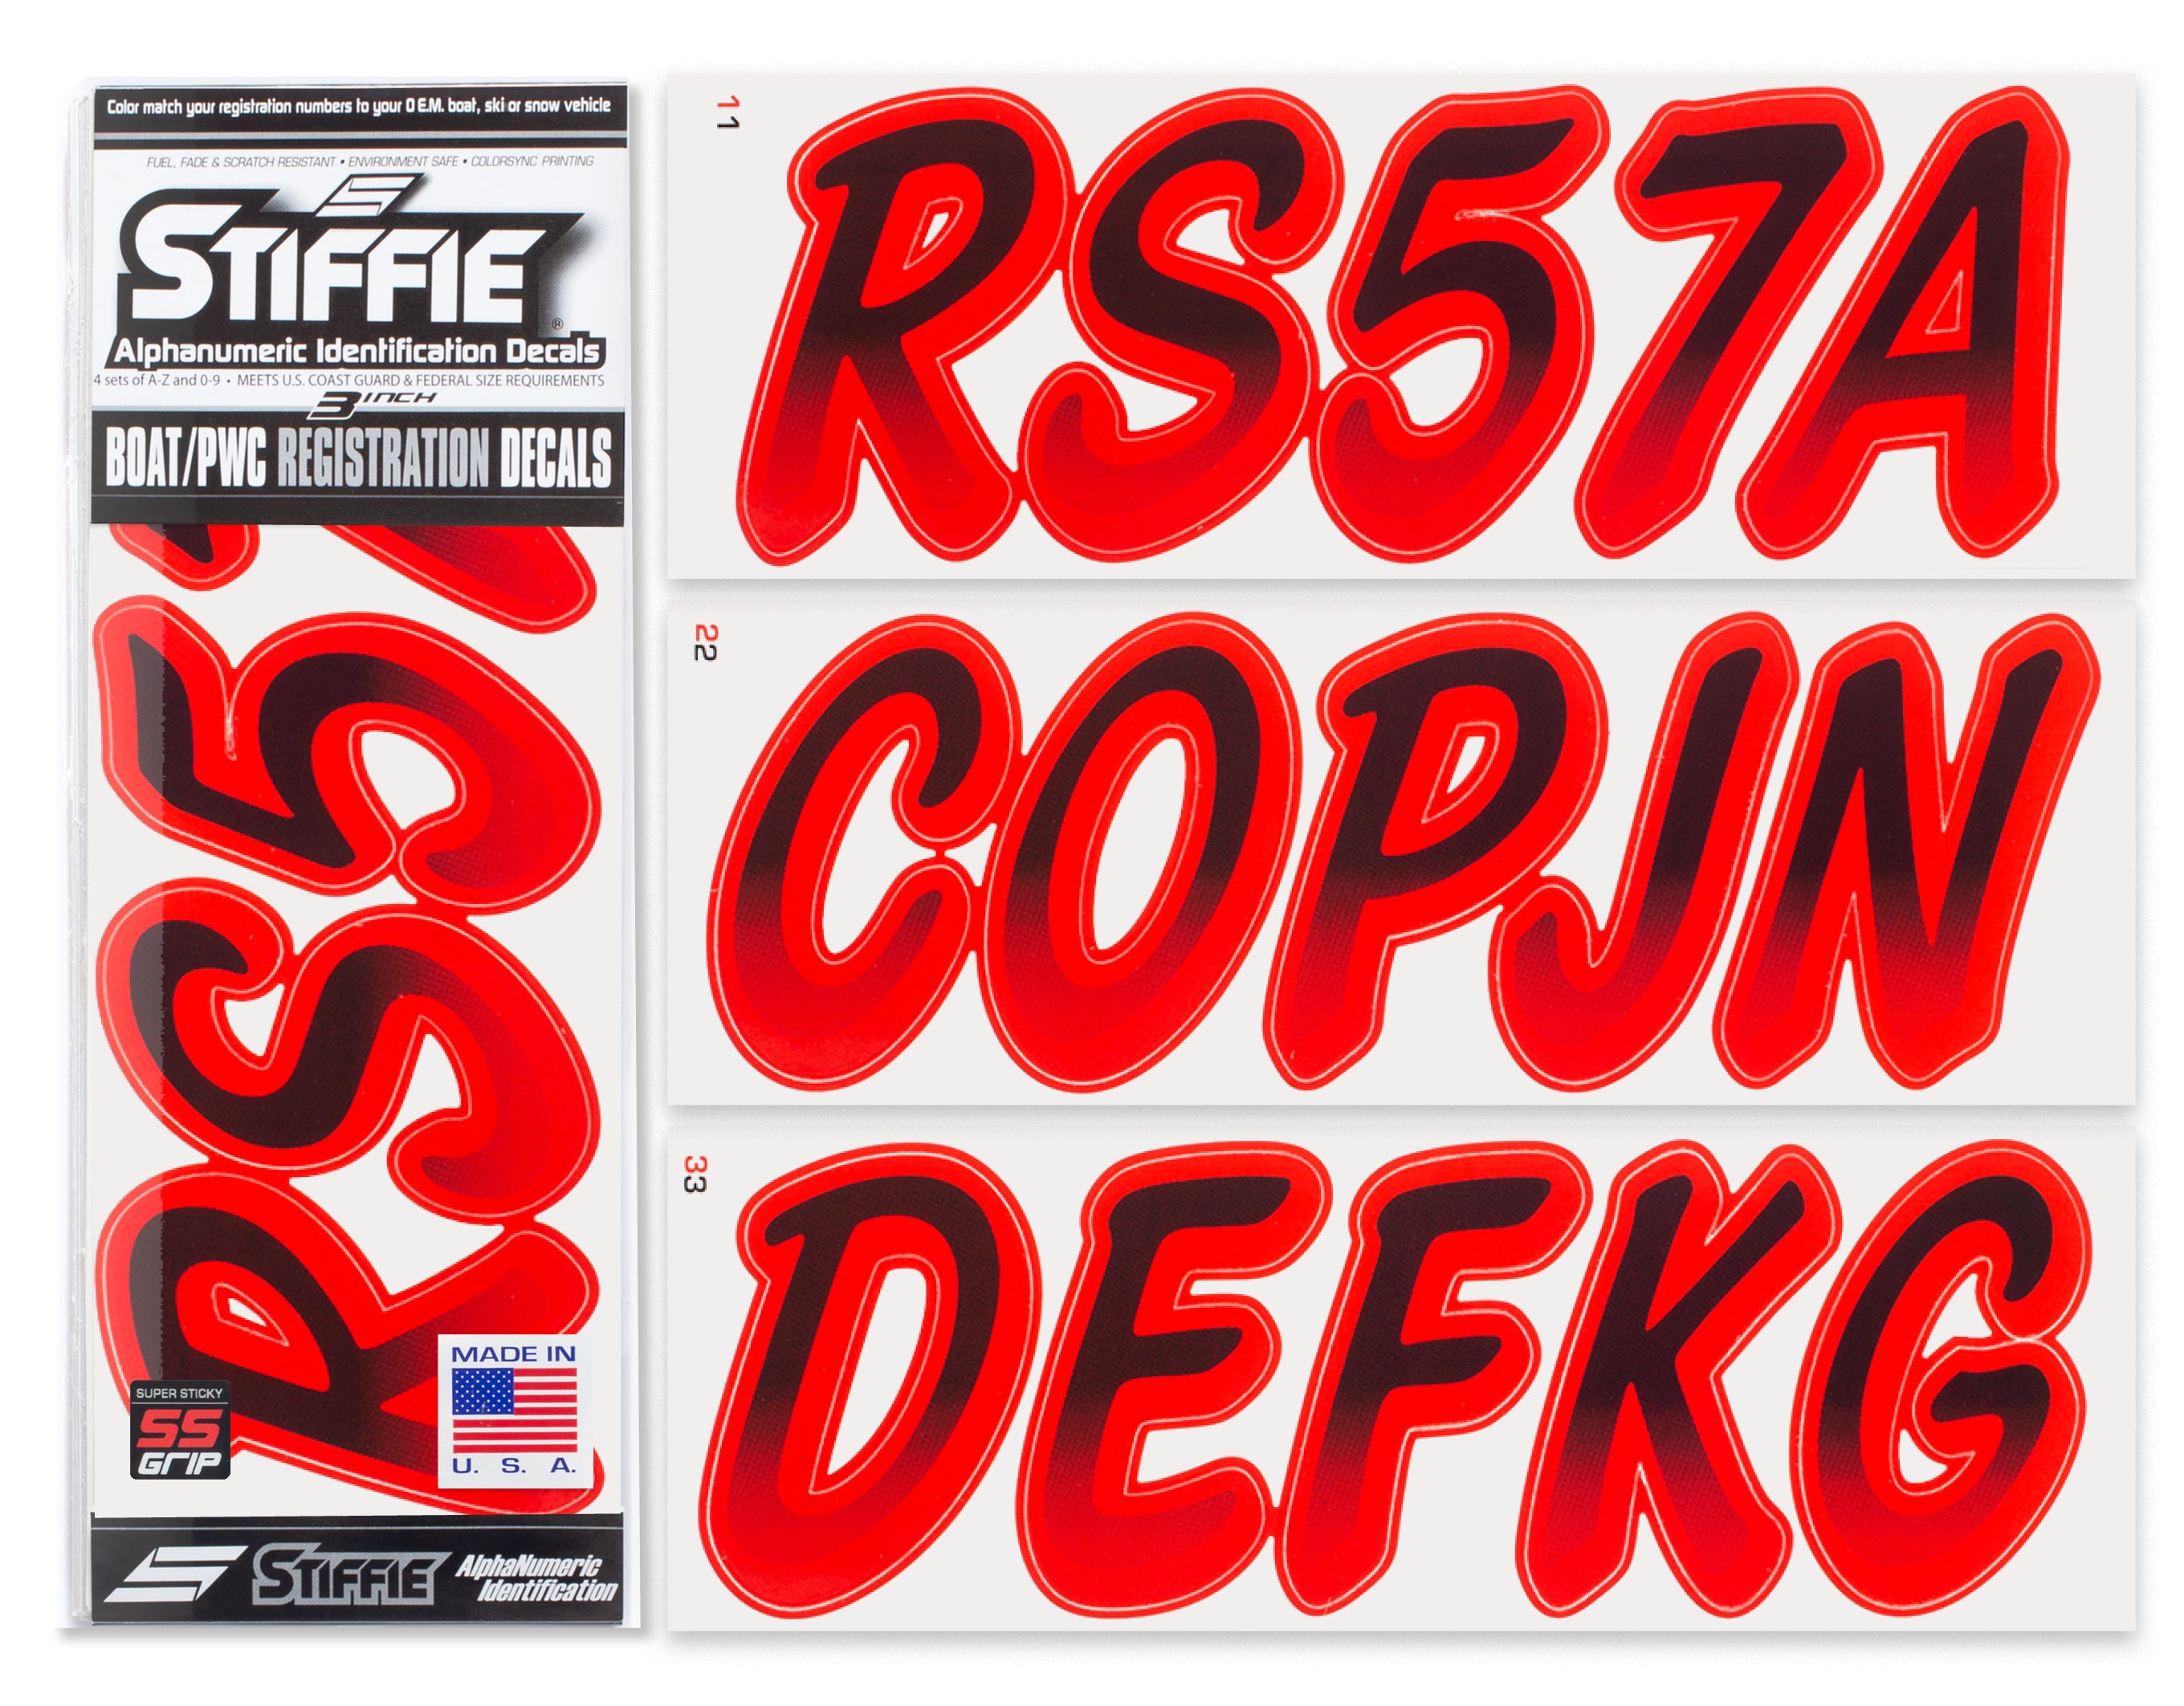 STIFFIE Whipline Black/Lava Red Super Sticky 3" Alpha Numeric Registration Identification Numbers Stickers Decals for Sea-Doo Spark, Inflatable Boats, Ribs, Hypalon/PVC, PWC and Boats.